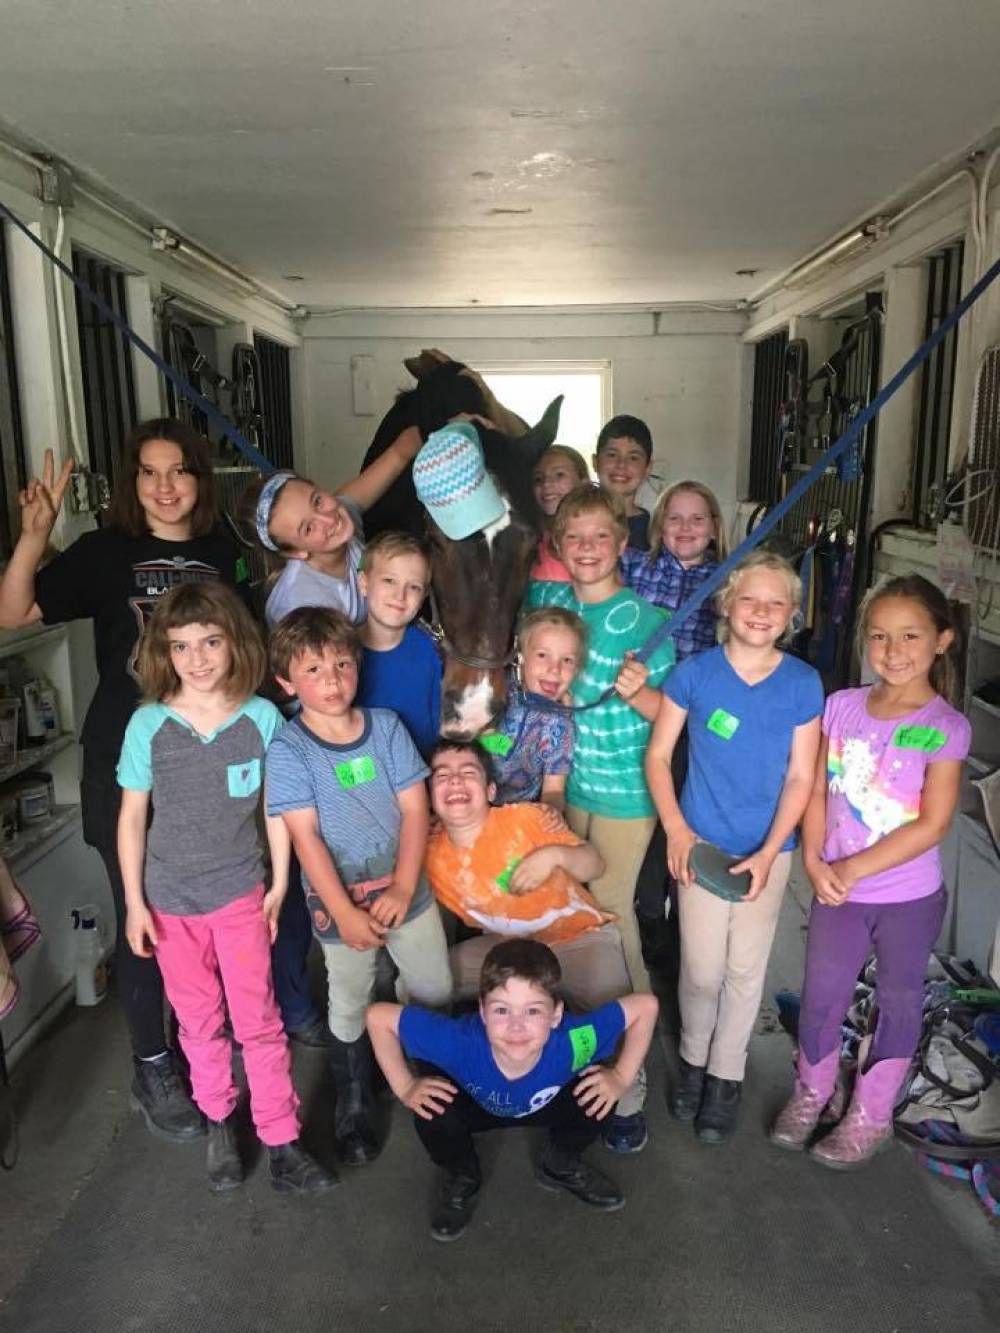 TOP RHODE ISLAND SPORTS CAMP: Faith Hill Farm is a Top Sports Summer Camp located in East Greenwich Rhode Island offering many fun and enriching Sports and other camp programs. 